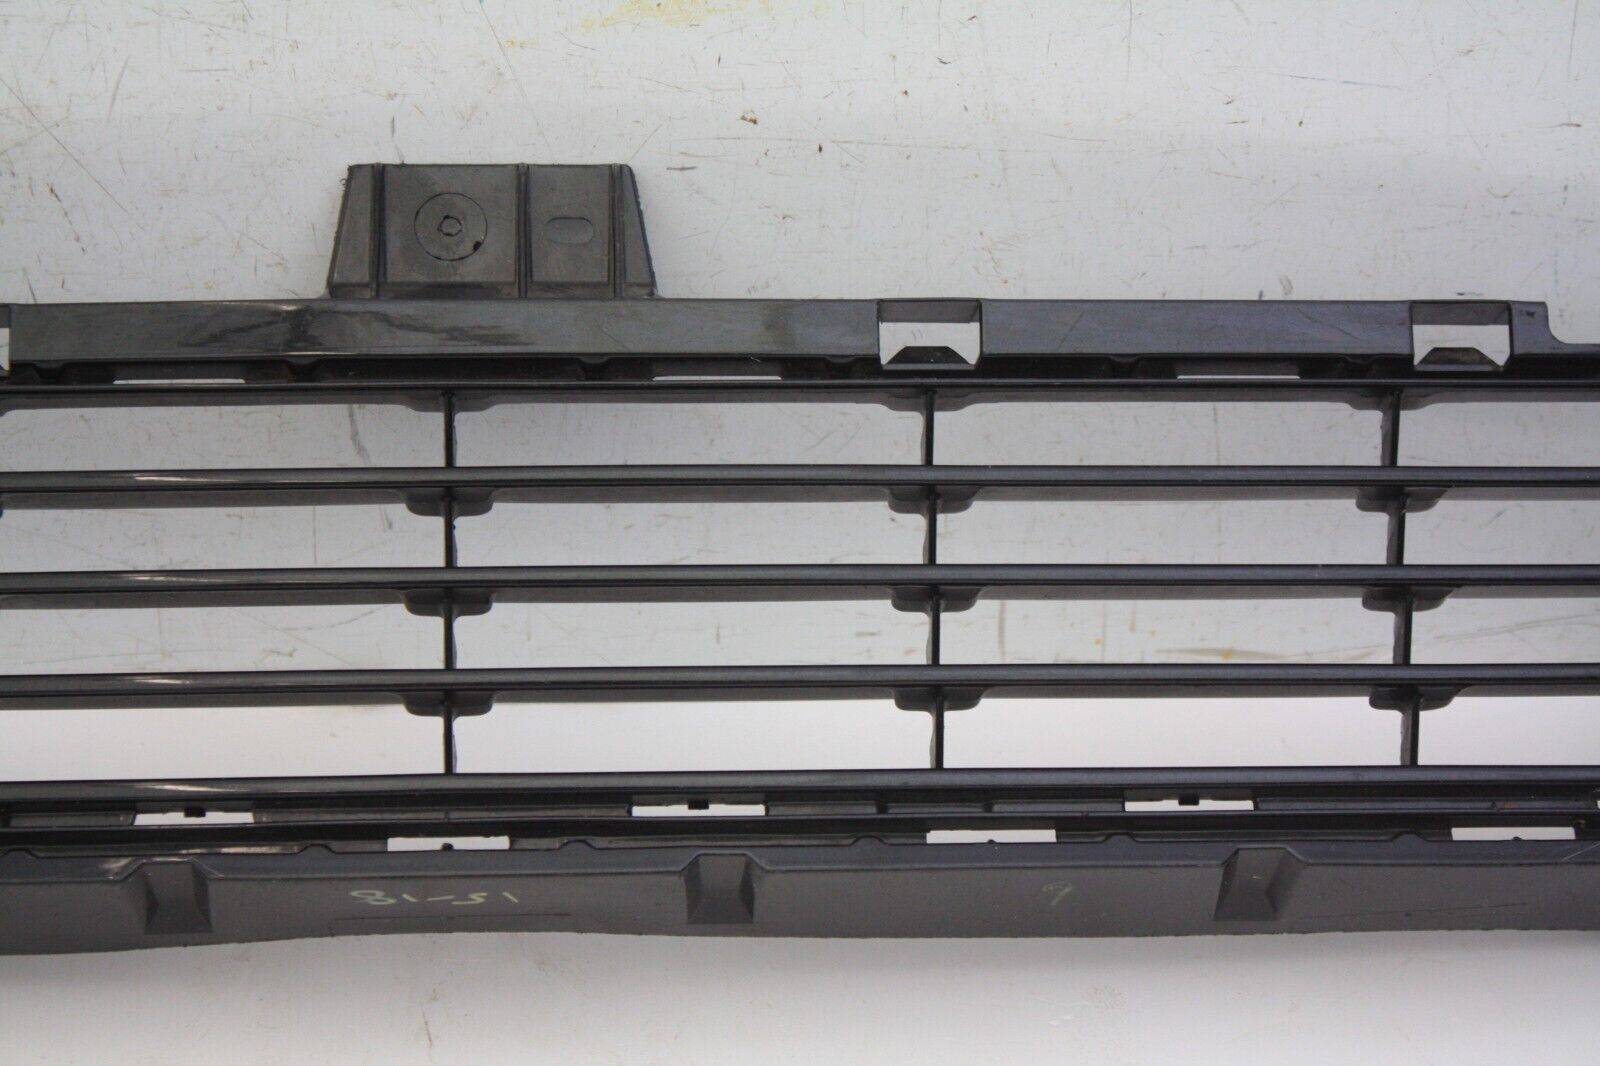 Toyota-Auris-Front-Bumper-Lower-Grill-2014-to2017-53112-02670-Genuine-SEE-PICS-176276900524-3